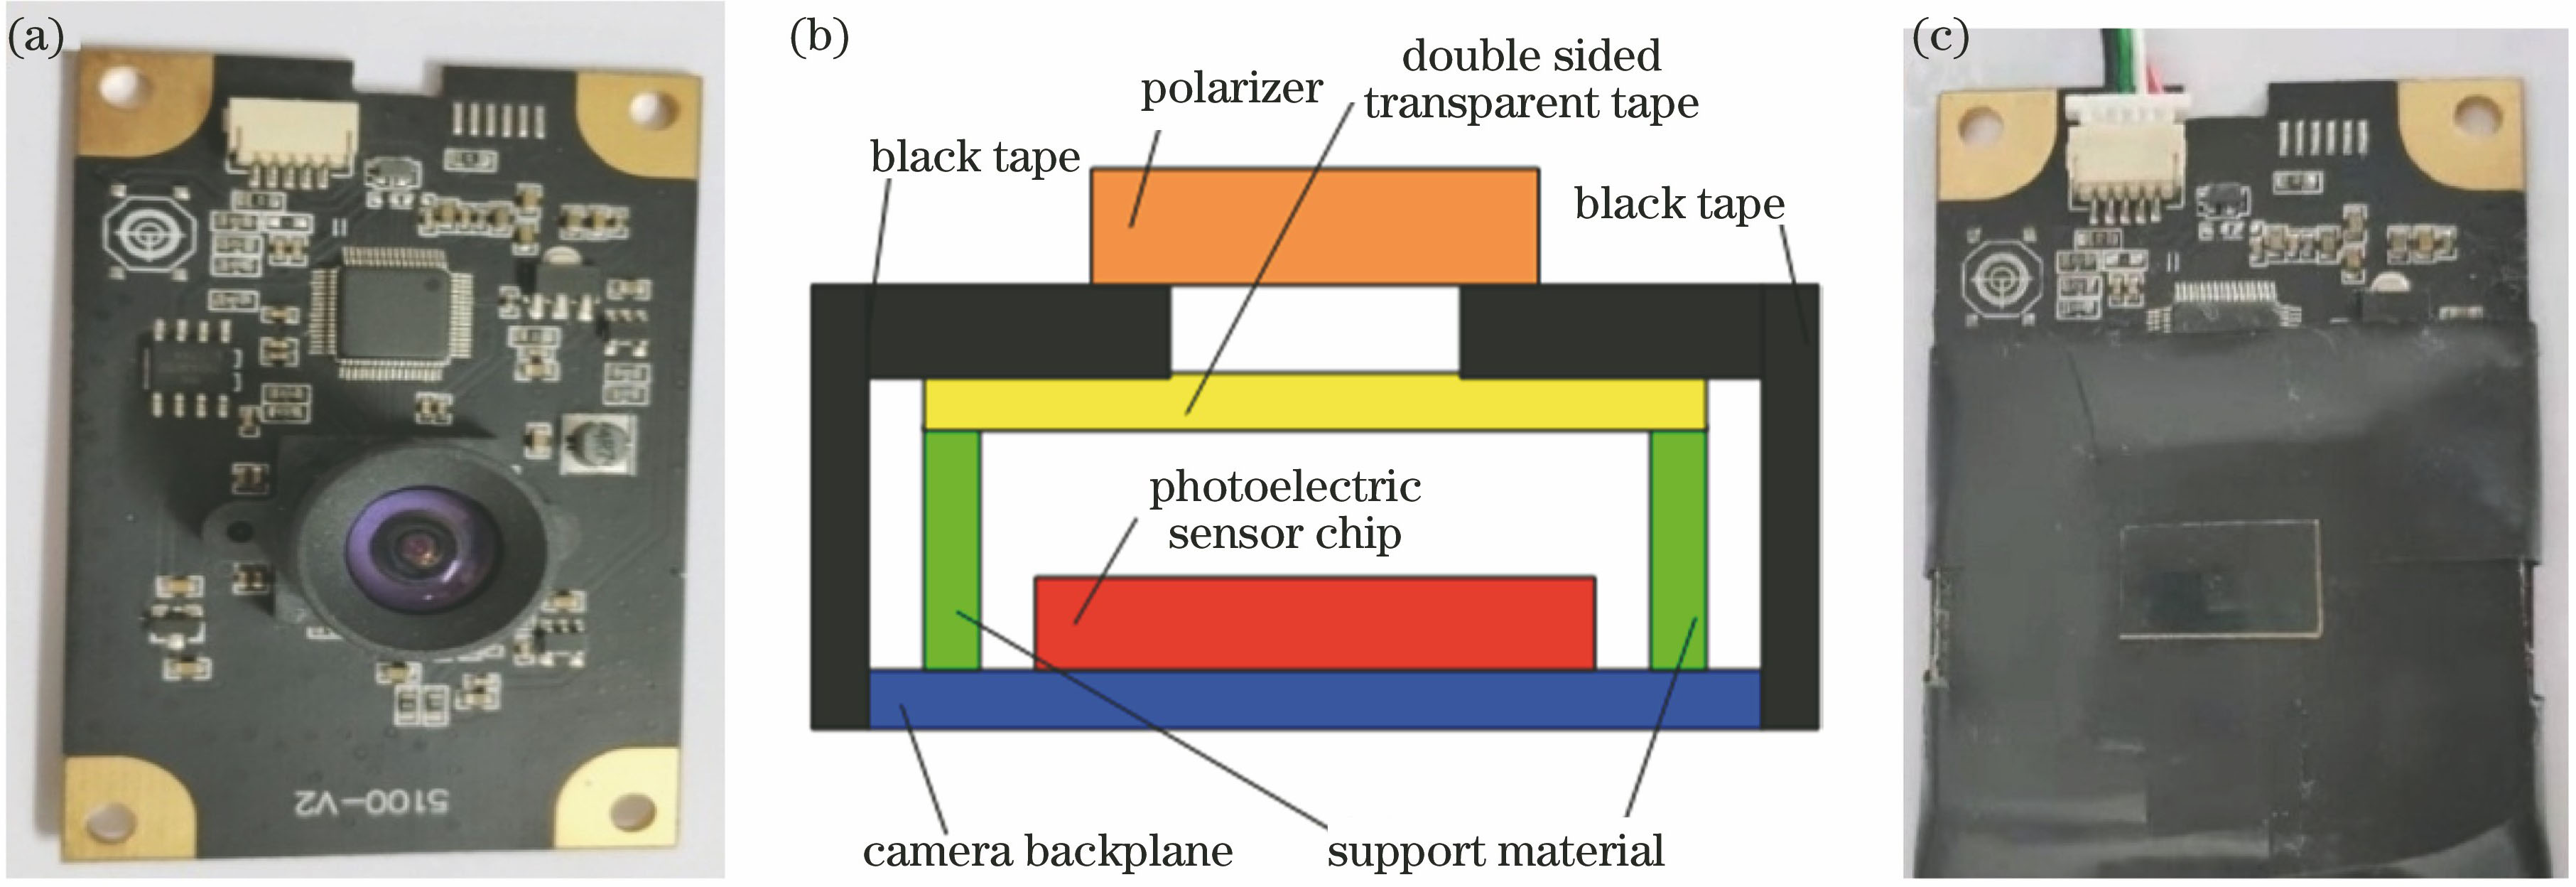 Lensless polarization computed imaging system. (a) Complete camera module diagram with lens; (b) cross-sectional schematic of a lensless polarization system; (c) finished image of lensless polarization computed imaging system